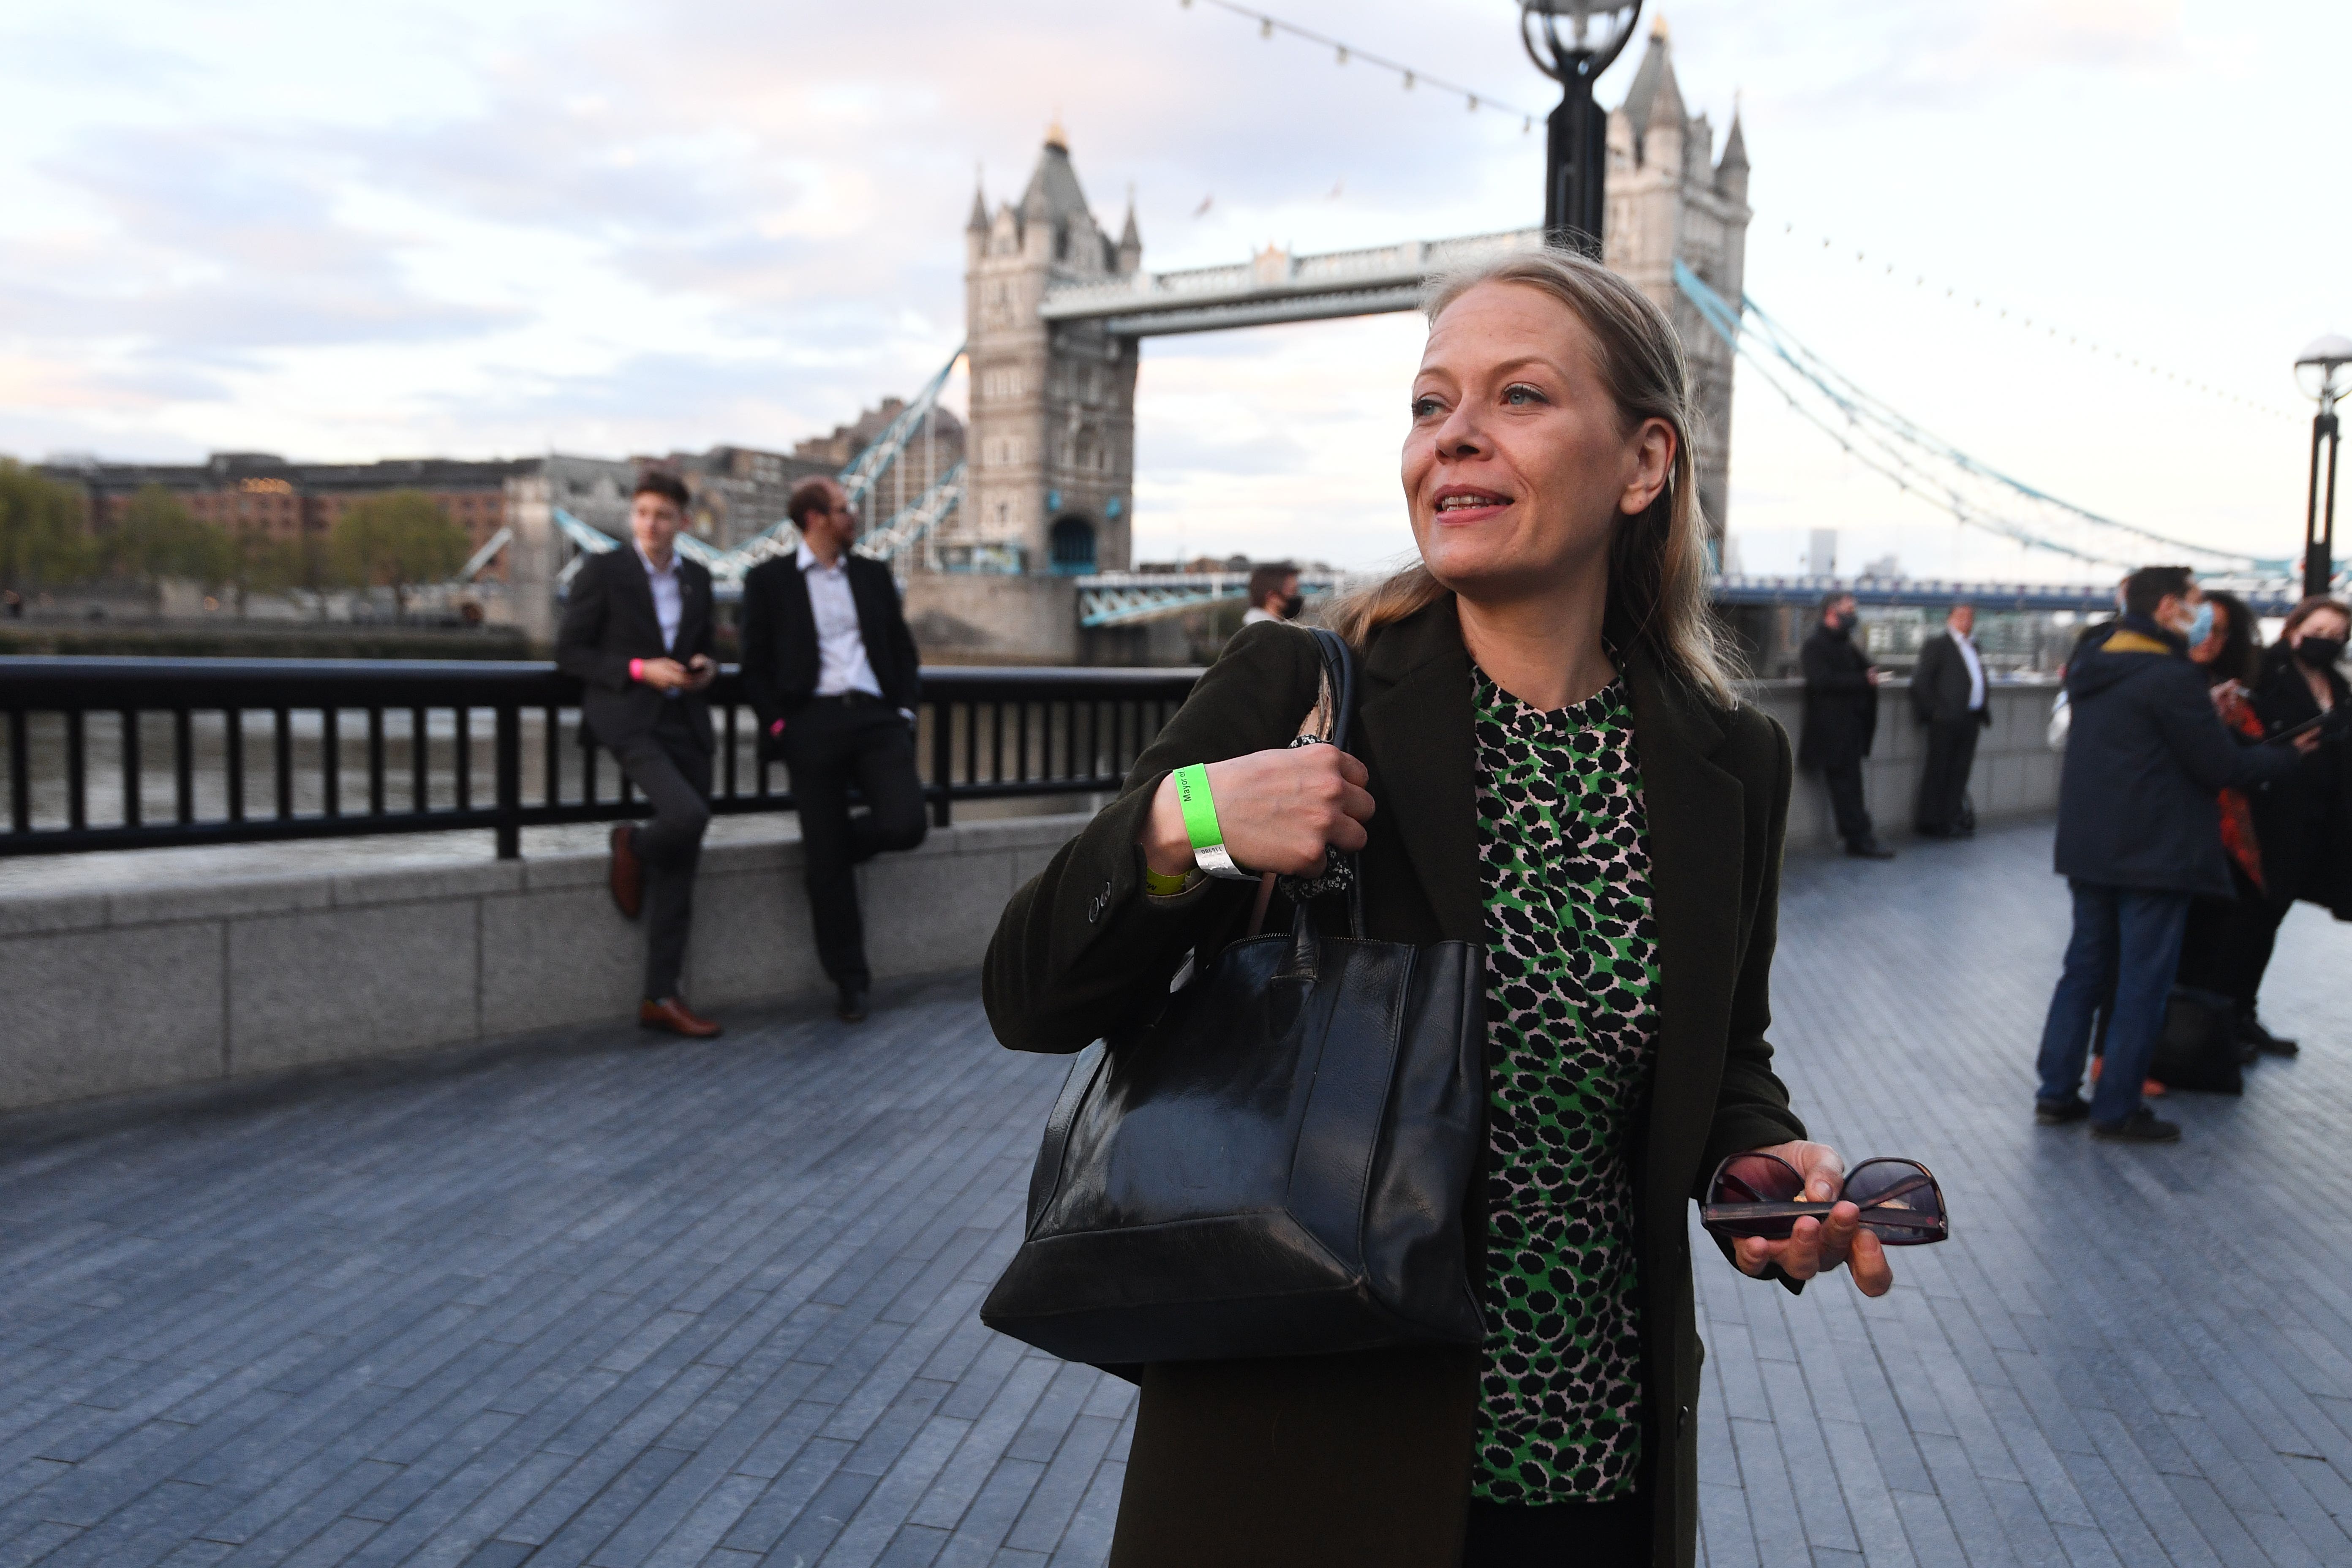 The Green Party’s Sian Berry quit the London Assembly three days after being elected